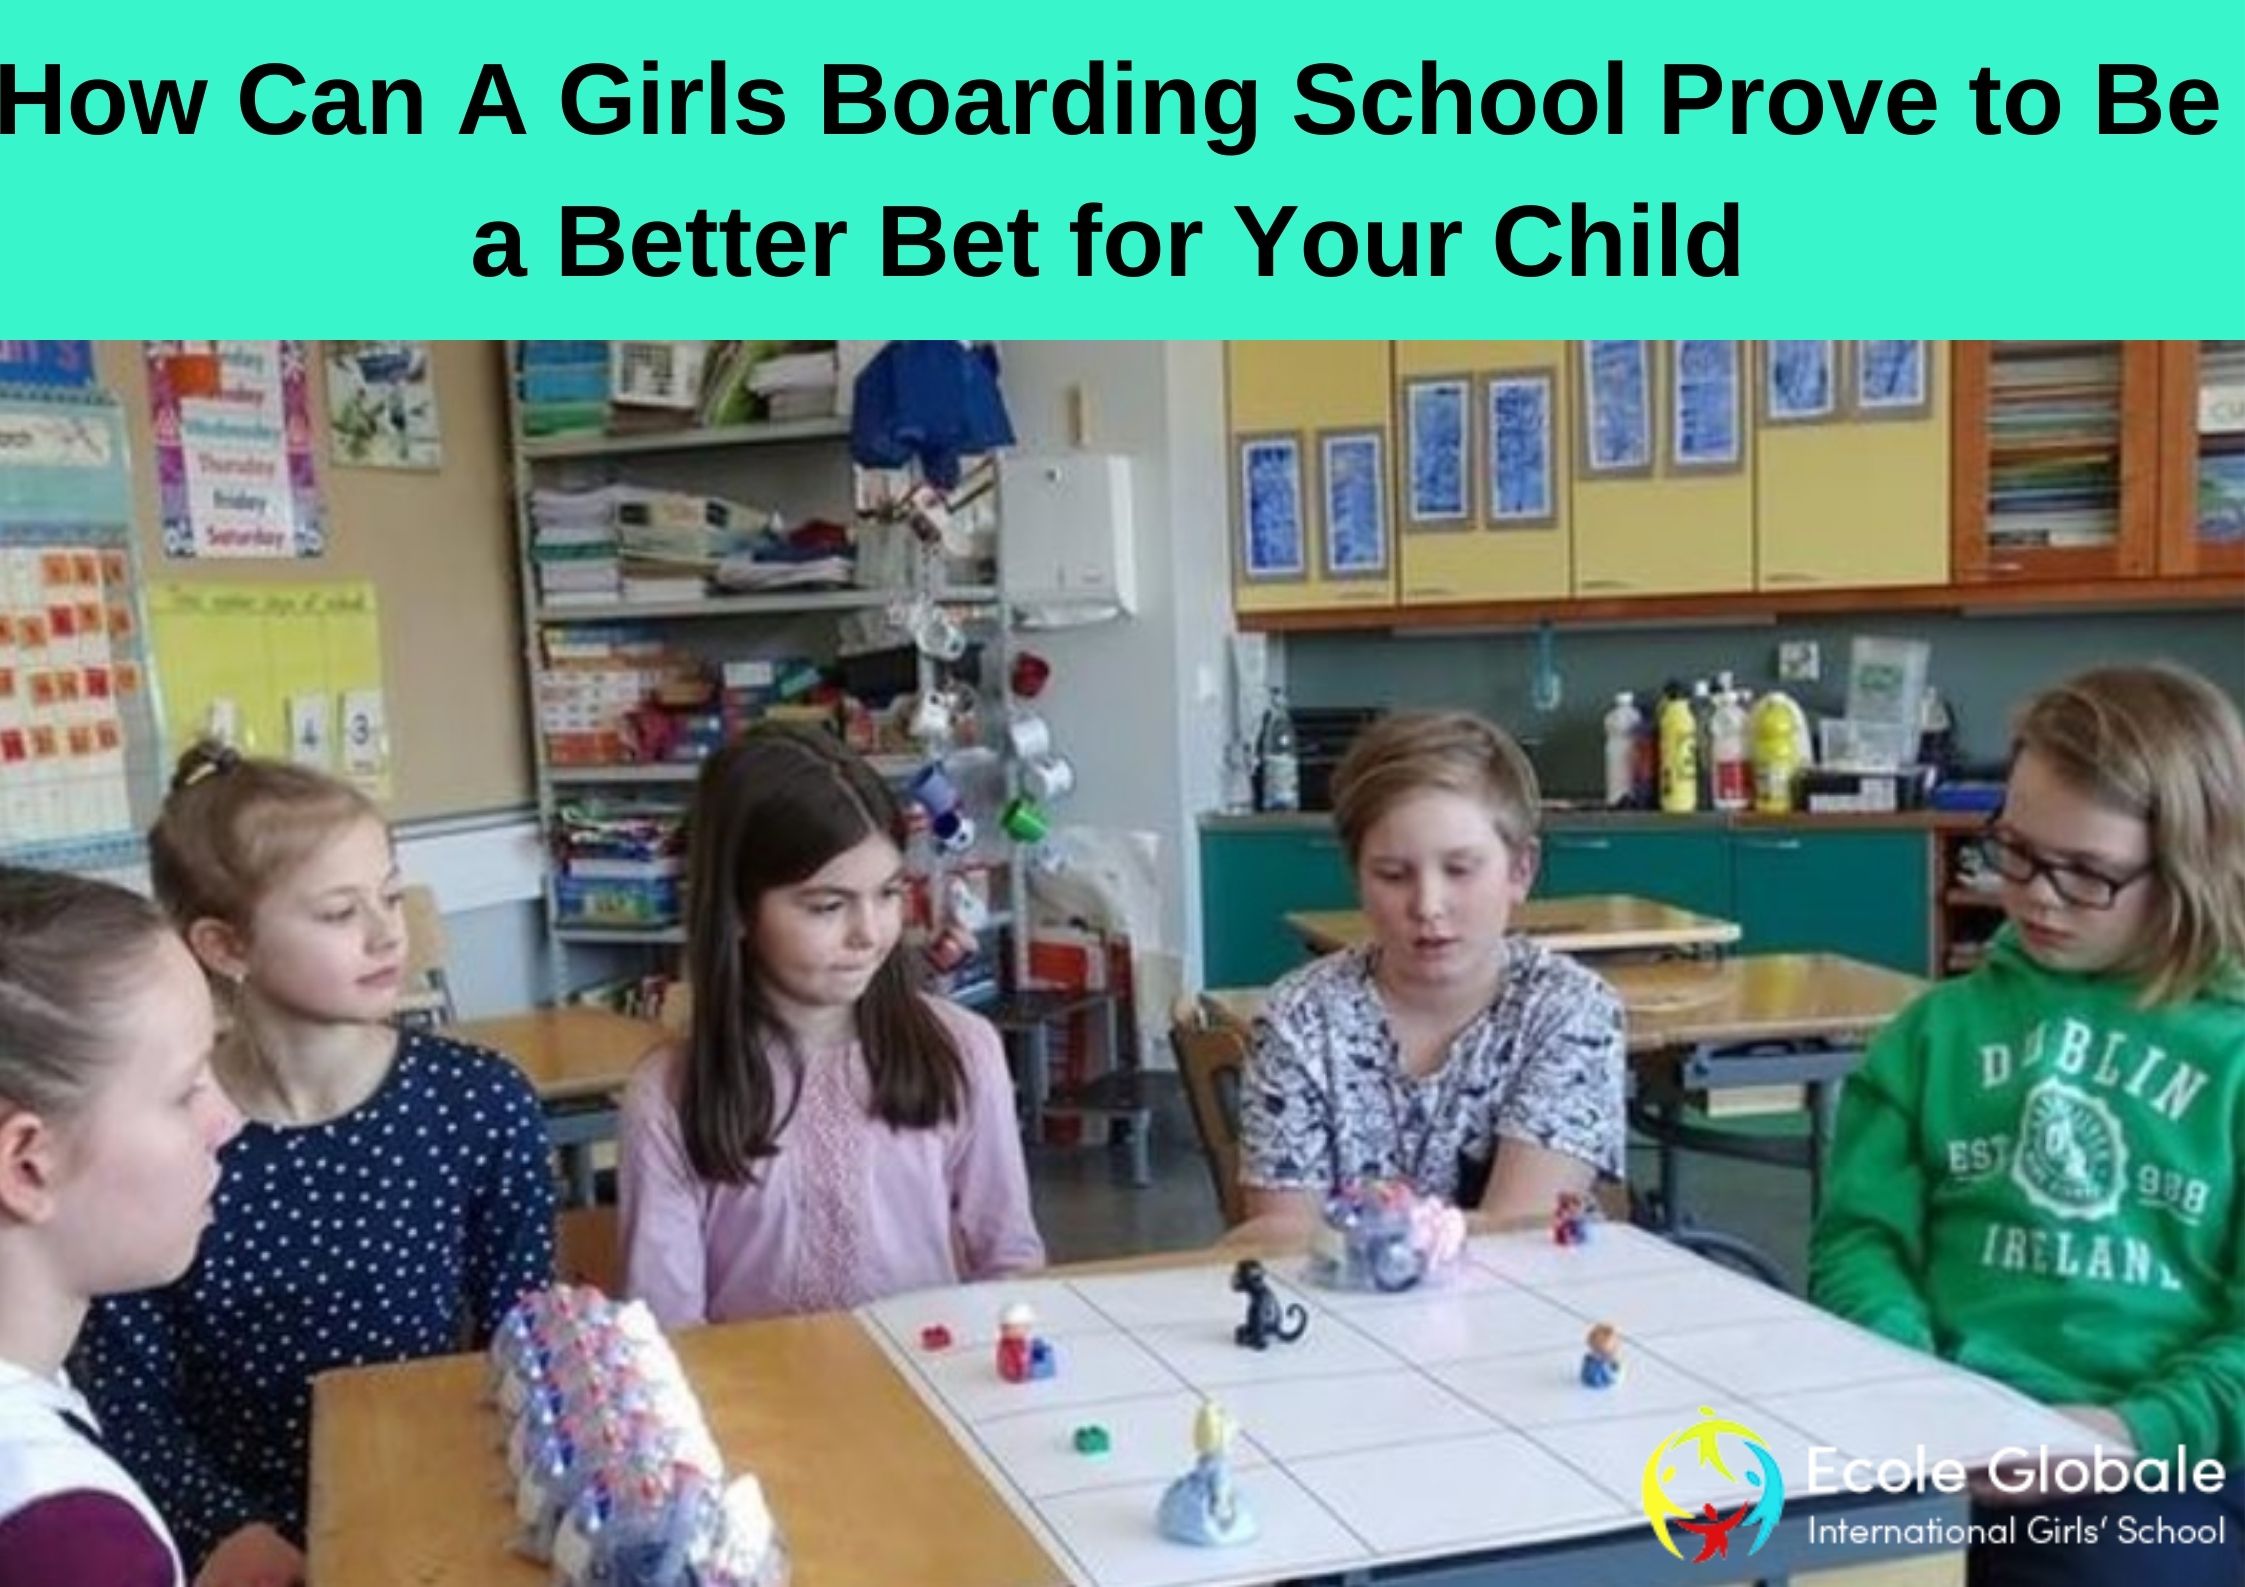 How Can A Girls Boarding School Prove to Be a Better Bet for Your Child